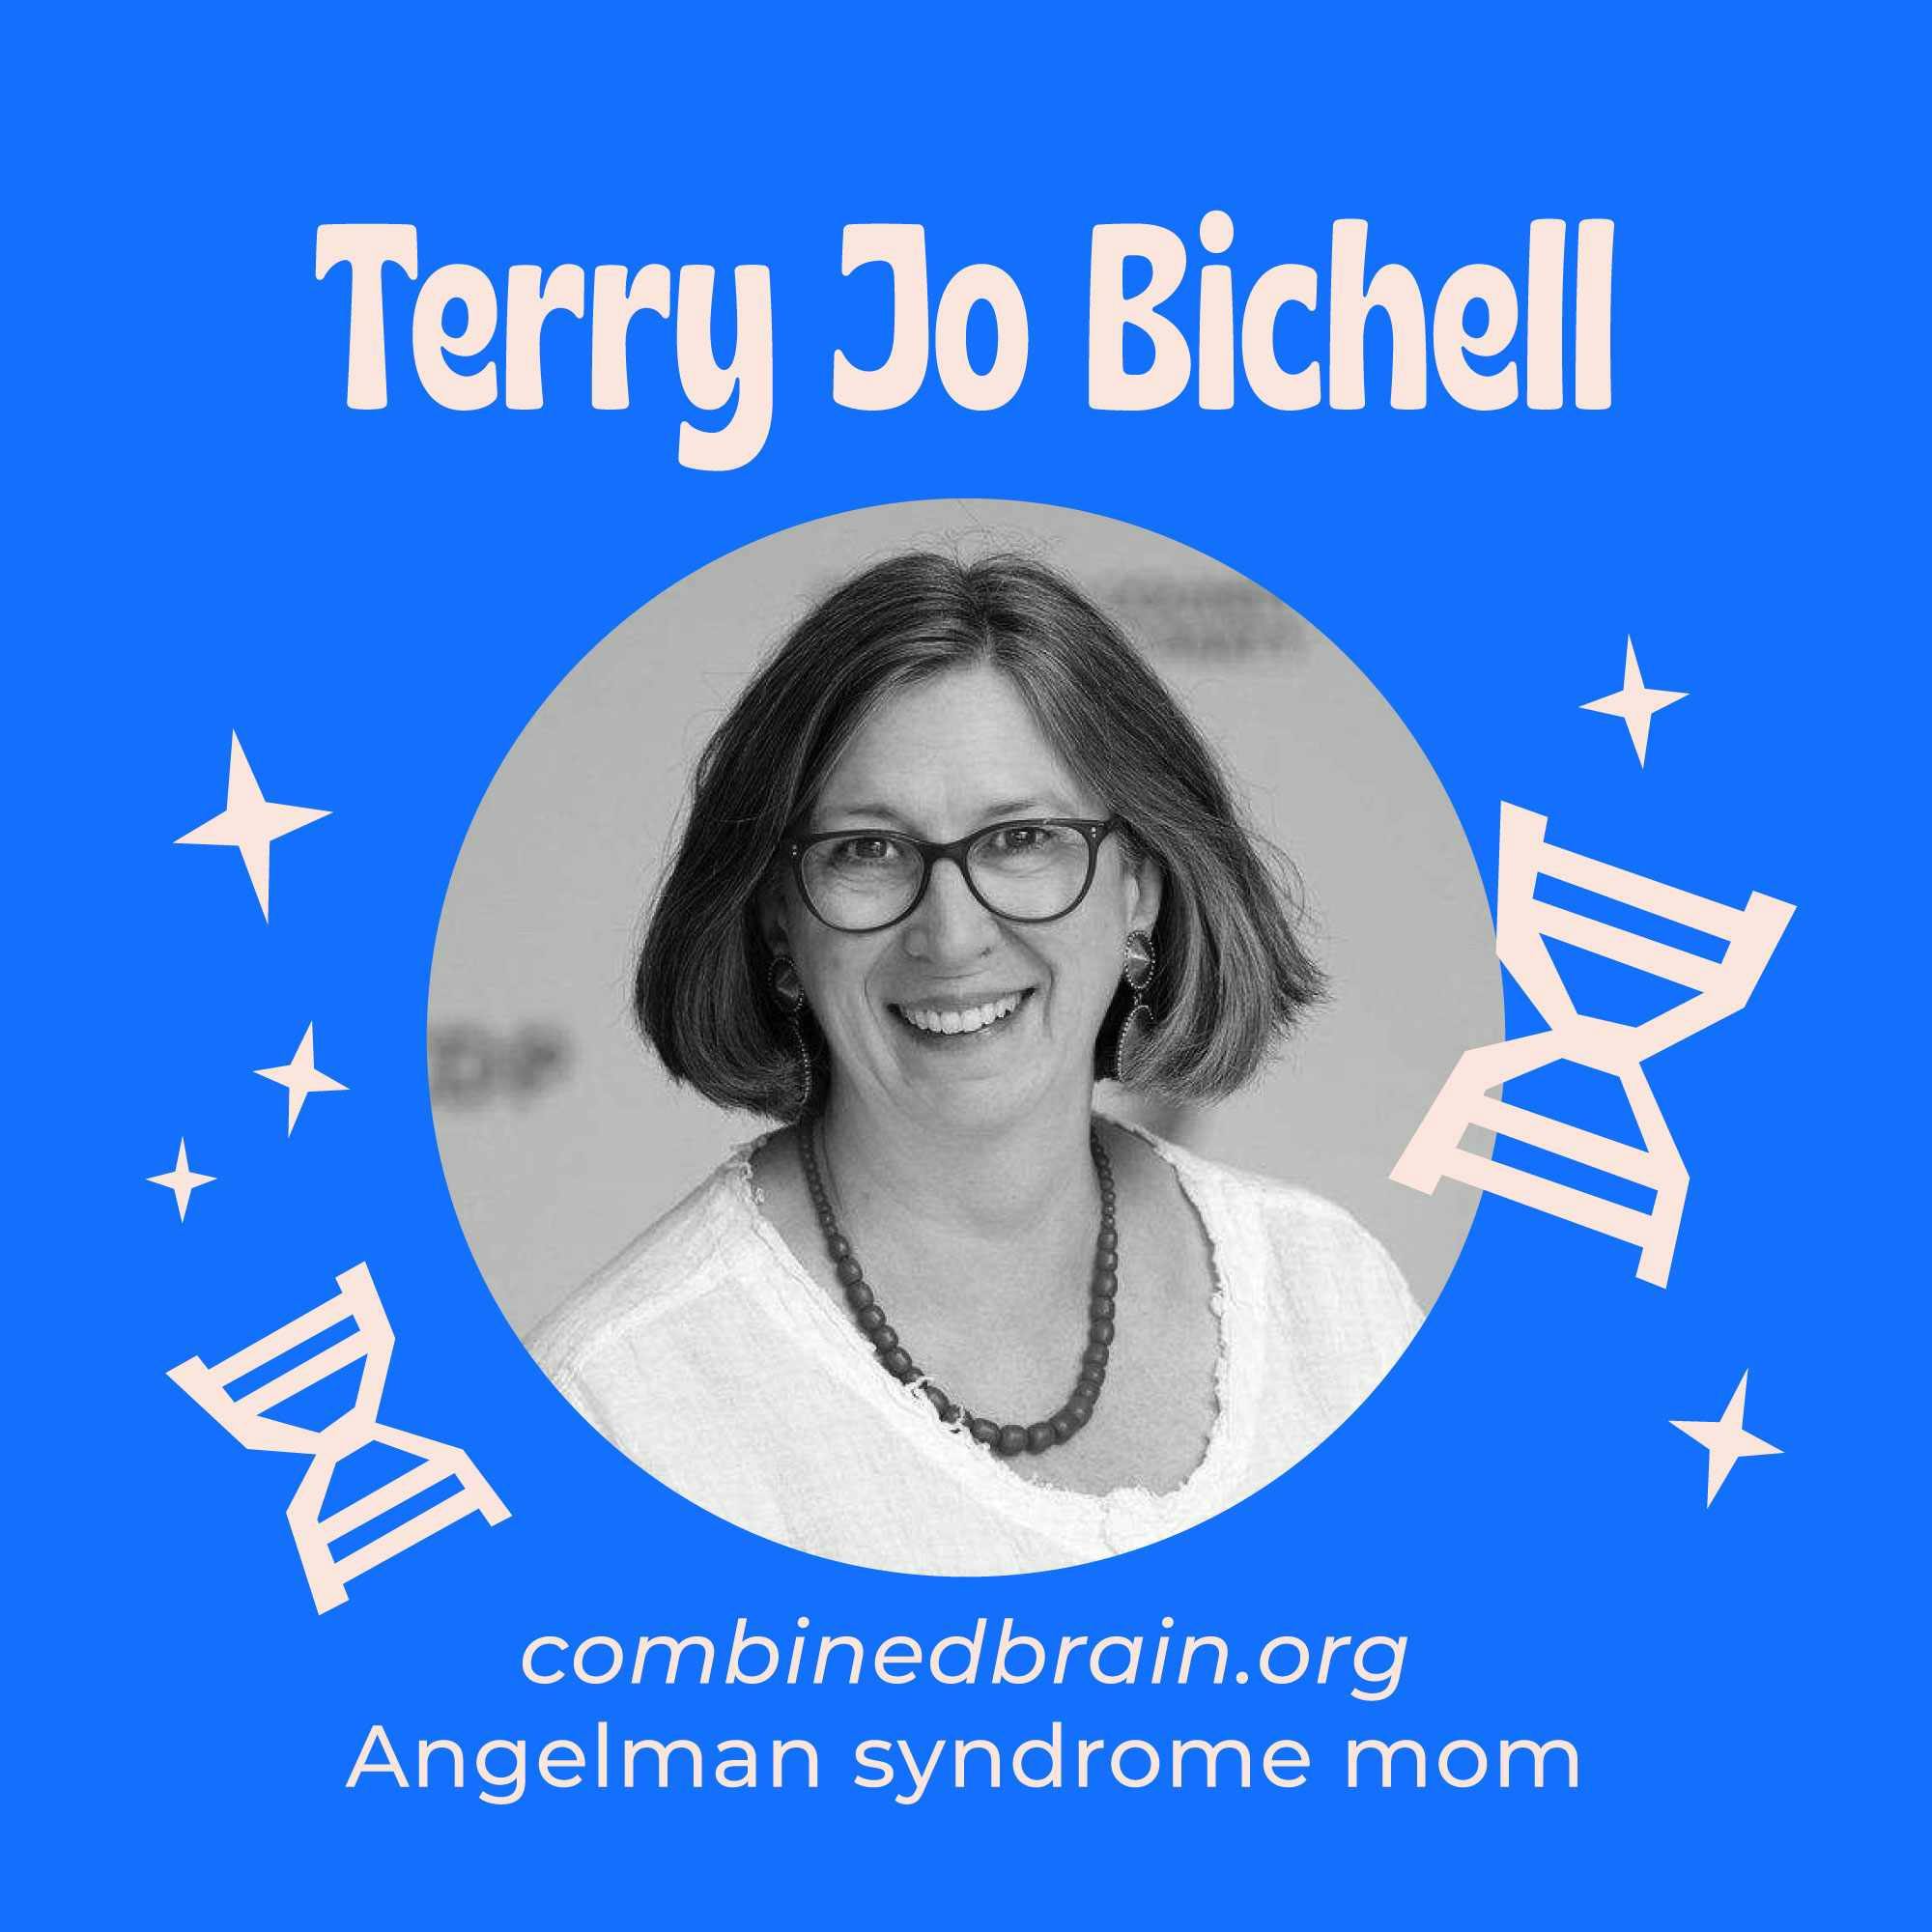 Uniting Science and Hope - COMBINEDBrain and it's Quest to Transform Research and Treatment for Rare Genetic Neurodevelopmental Disorders with Terry Jo Bichell